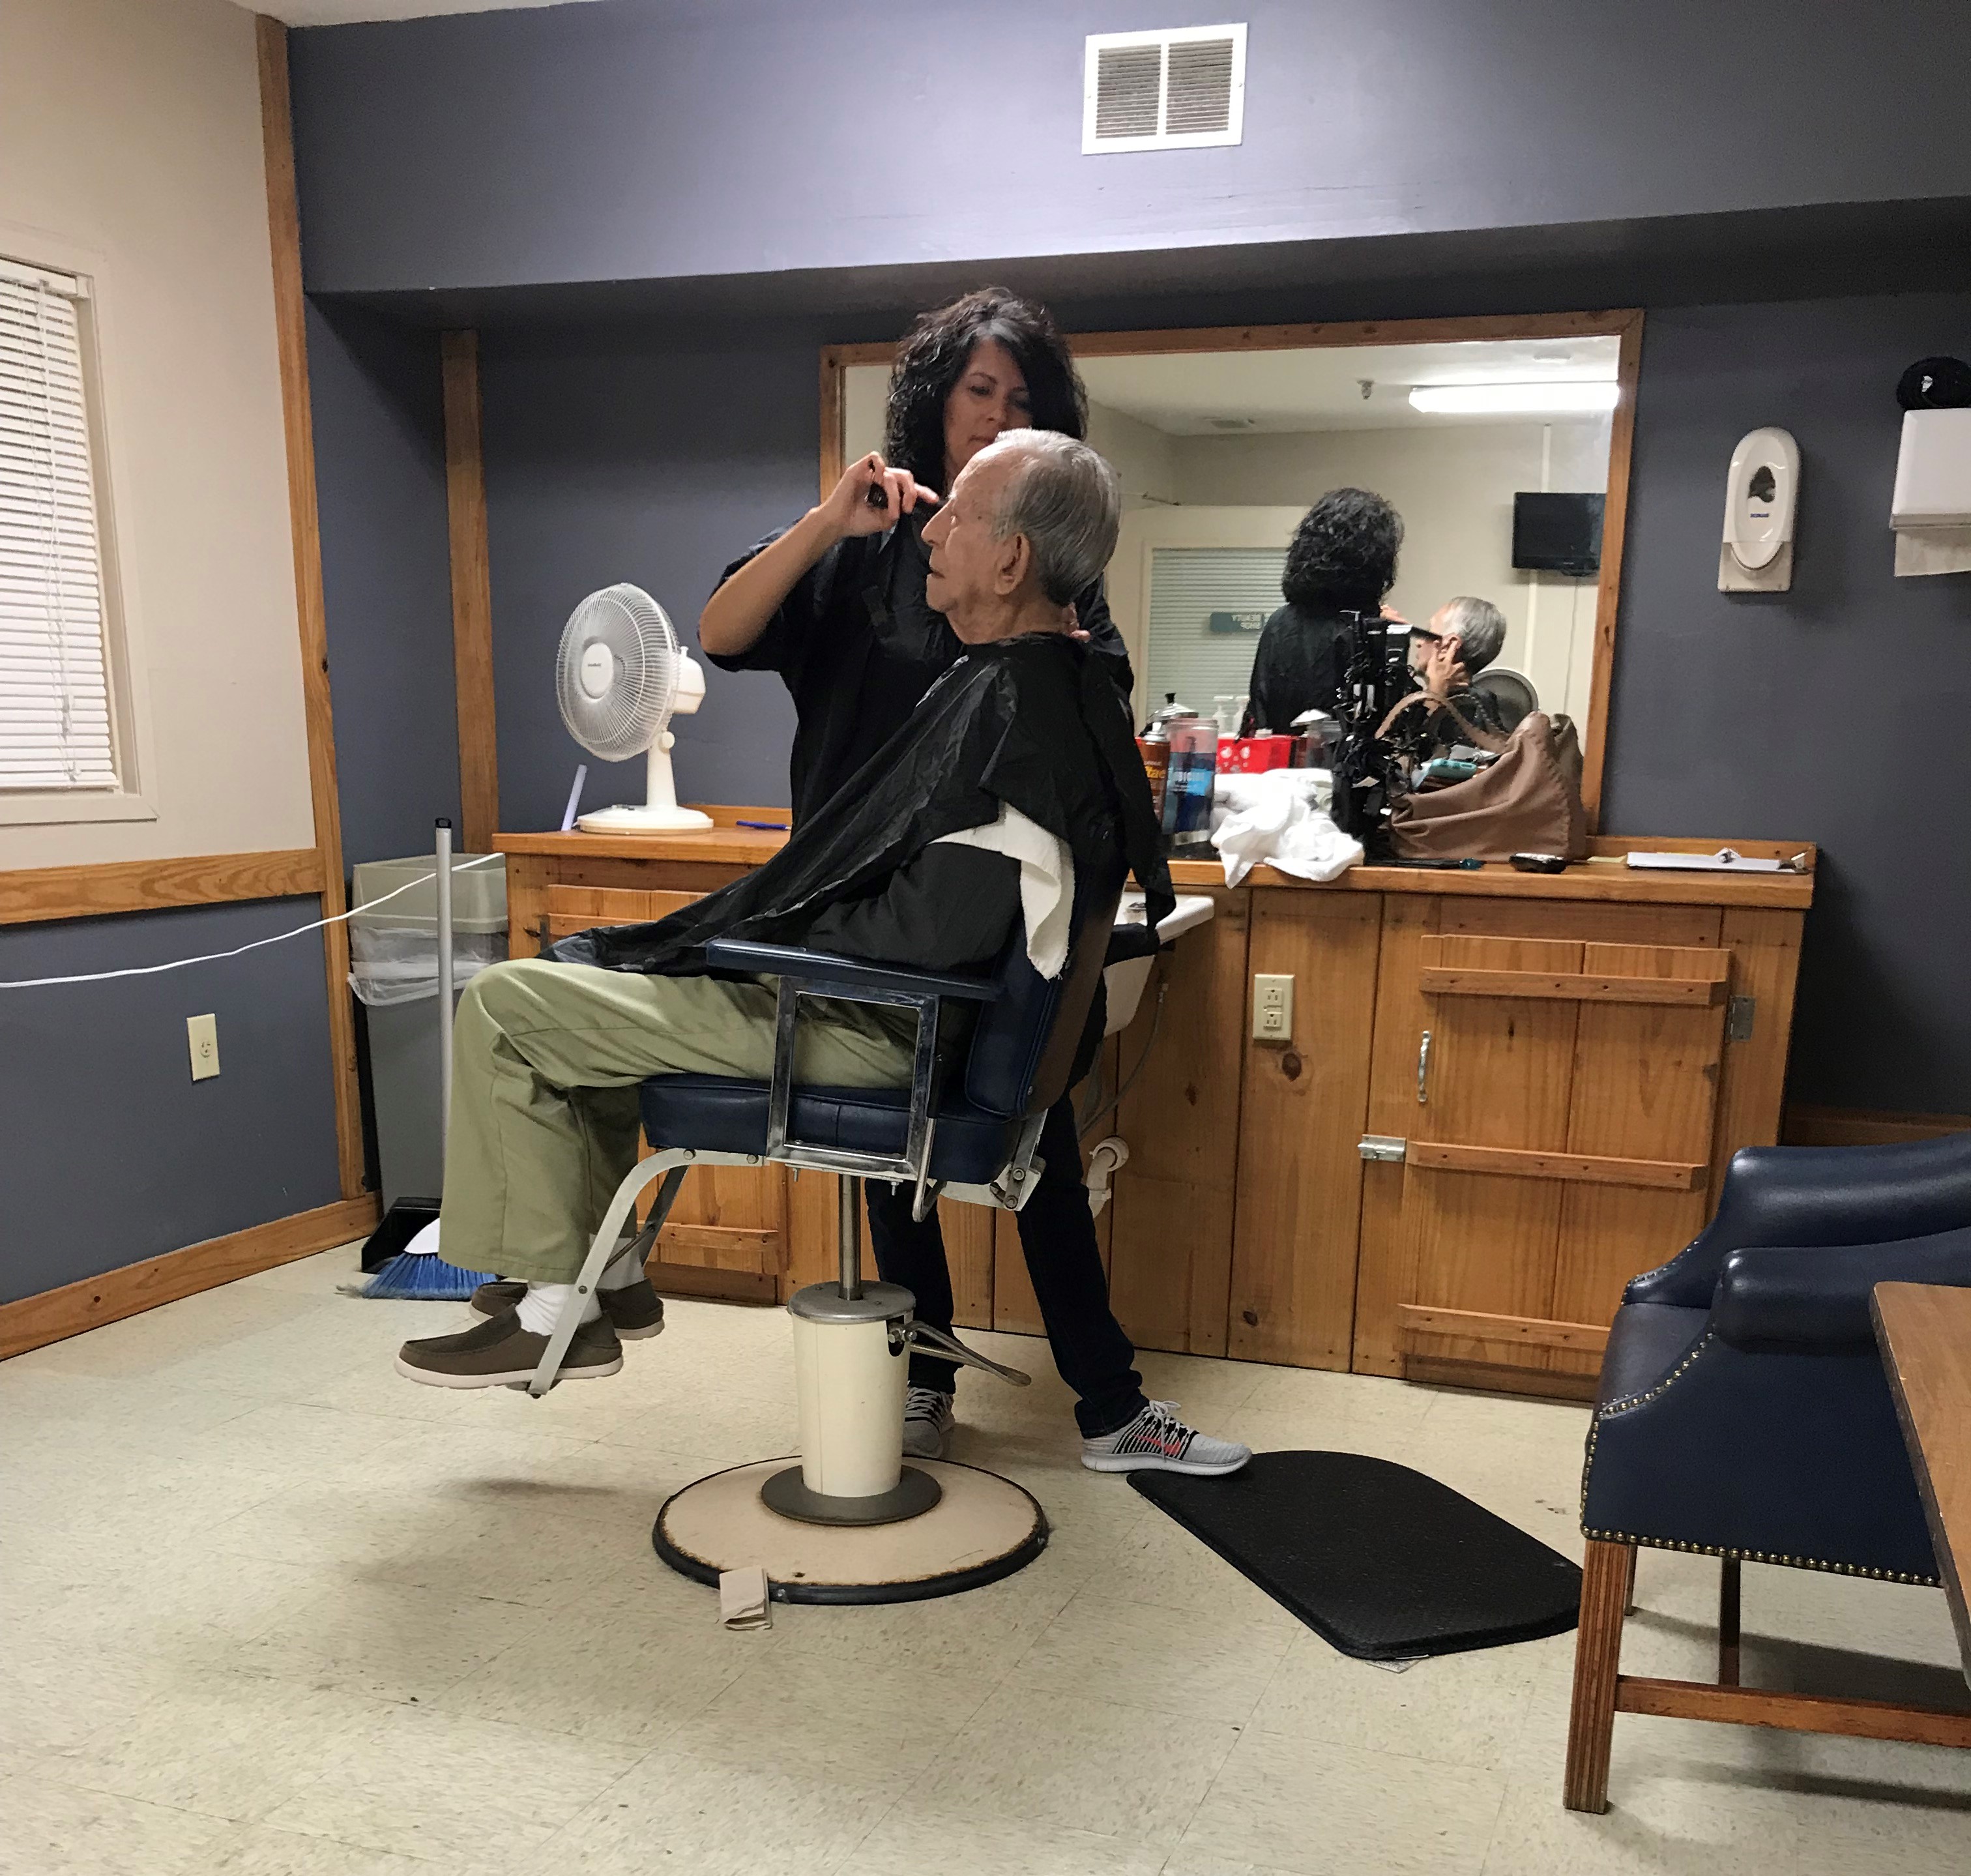 resident getting spa treatment in chair